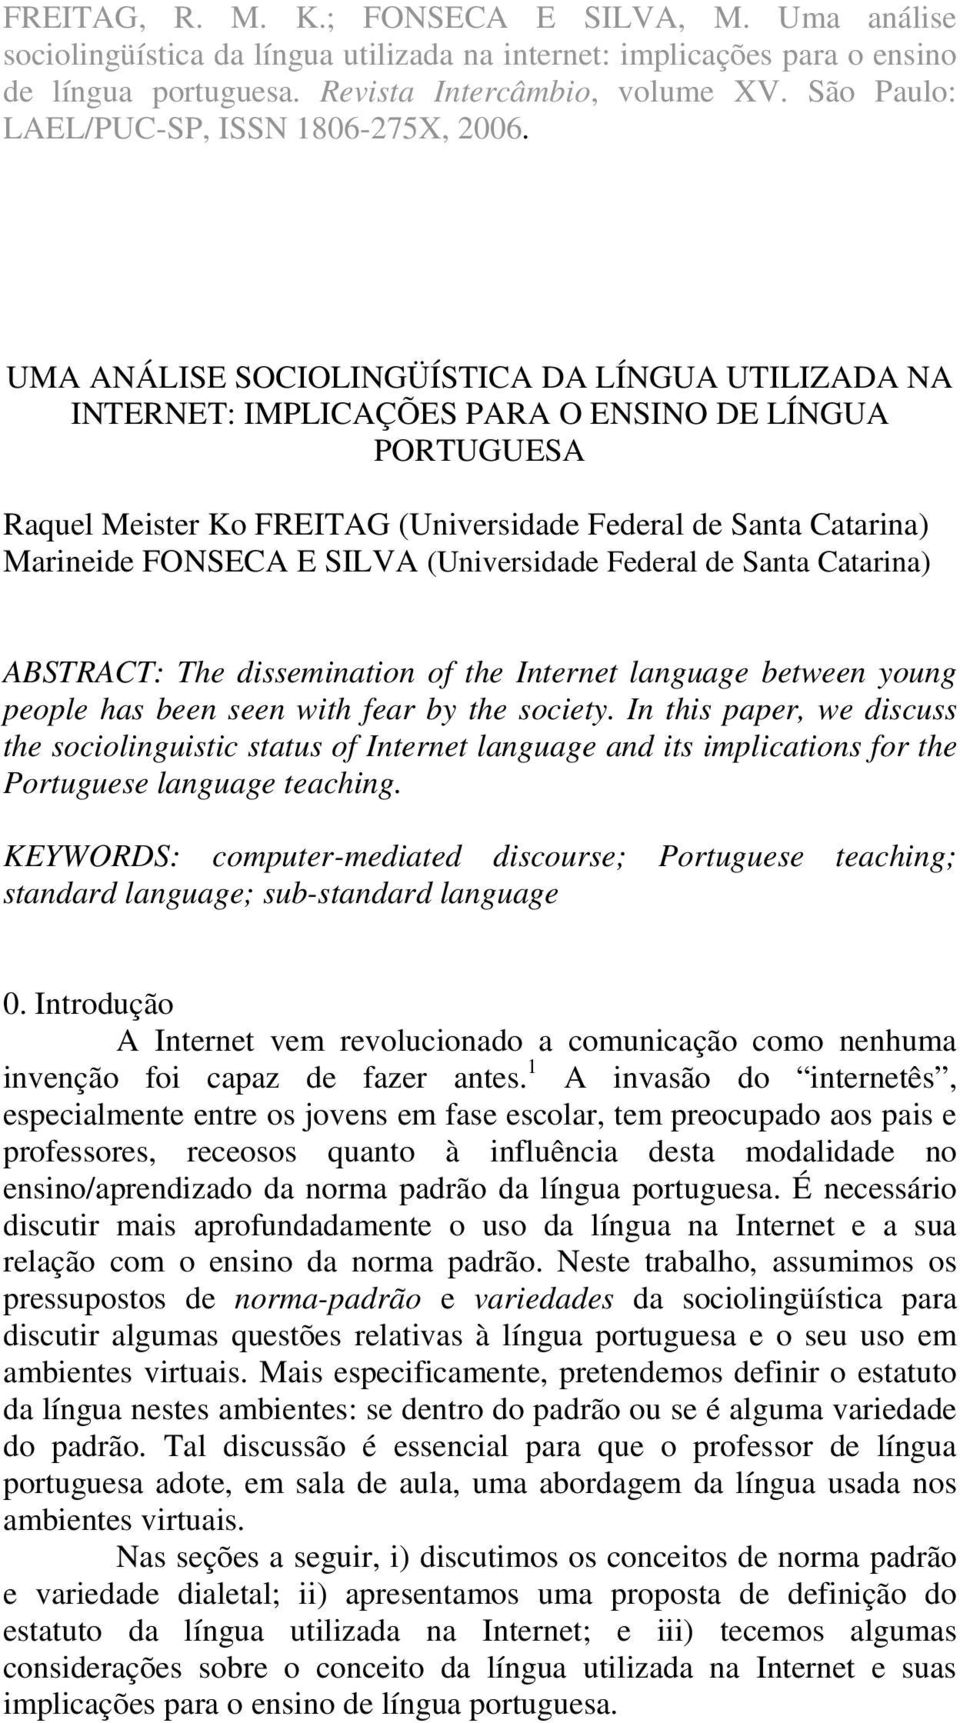 In this paper, we discuss the sociolinguistic status of Internet language and its implications for the Portuguese language teaching.